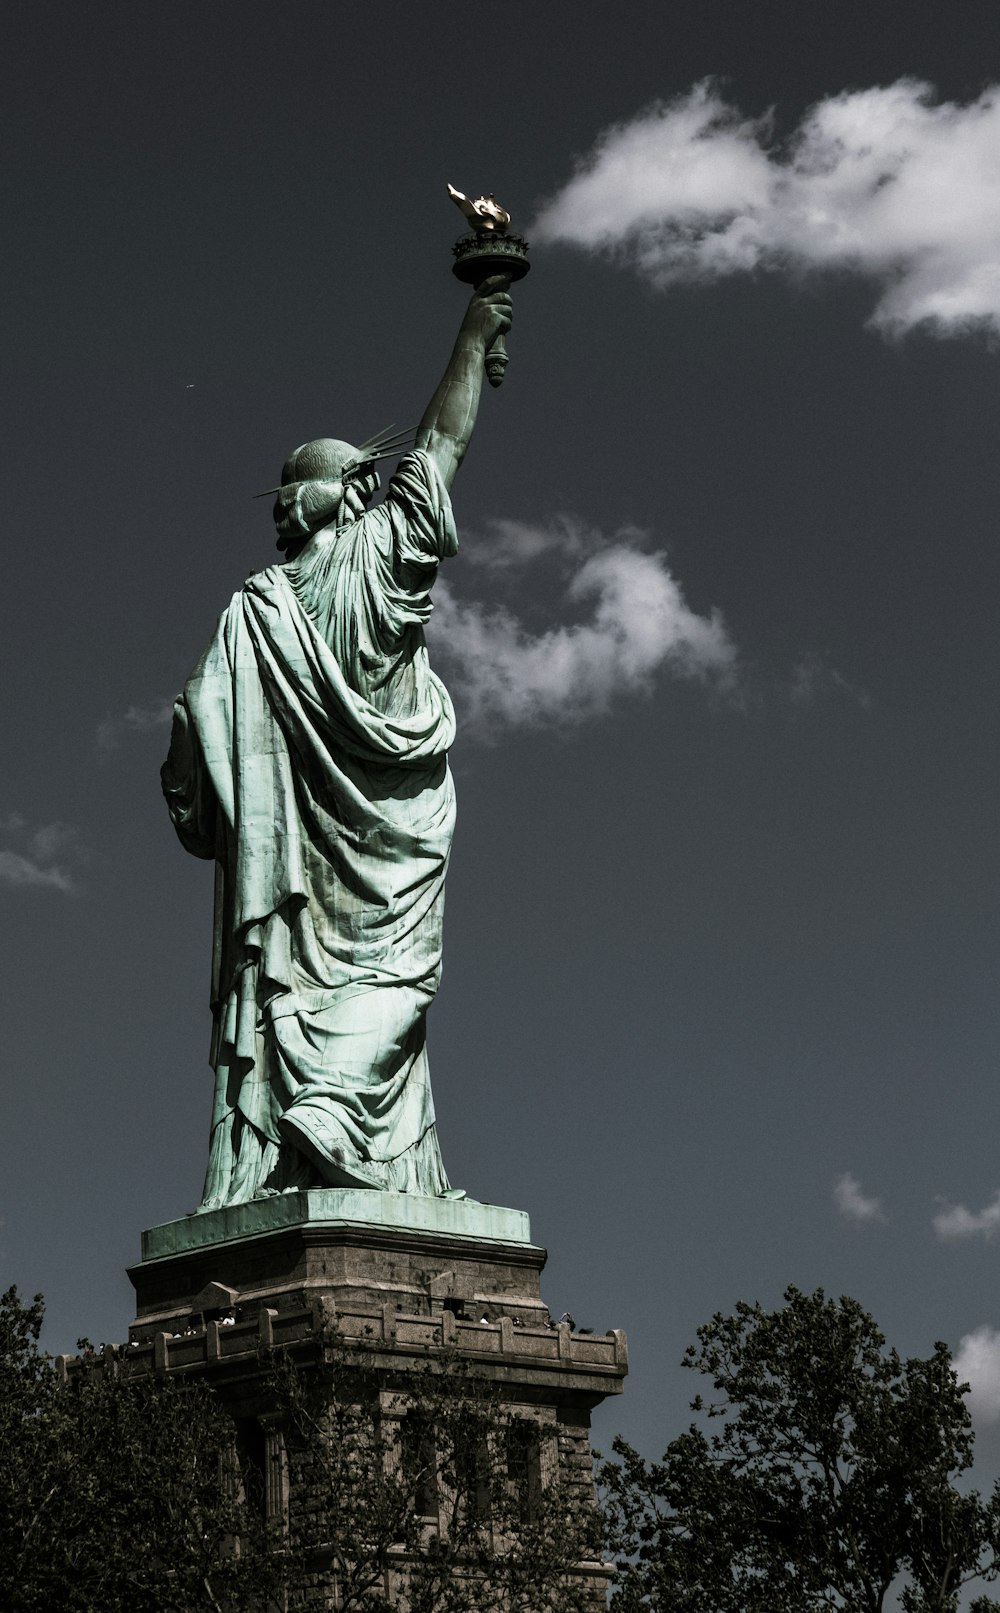 a statue of liberty is shown against a cloudy sky